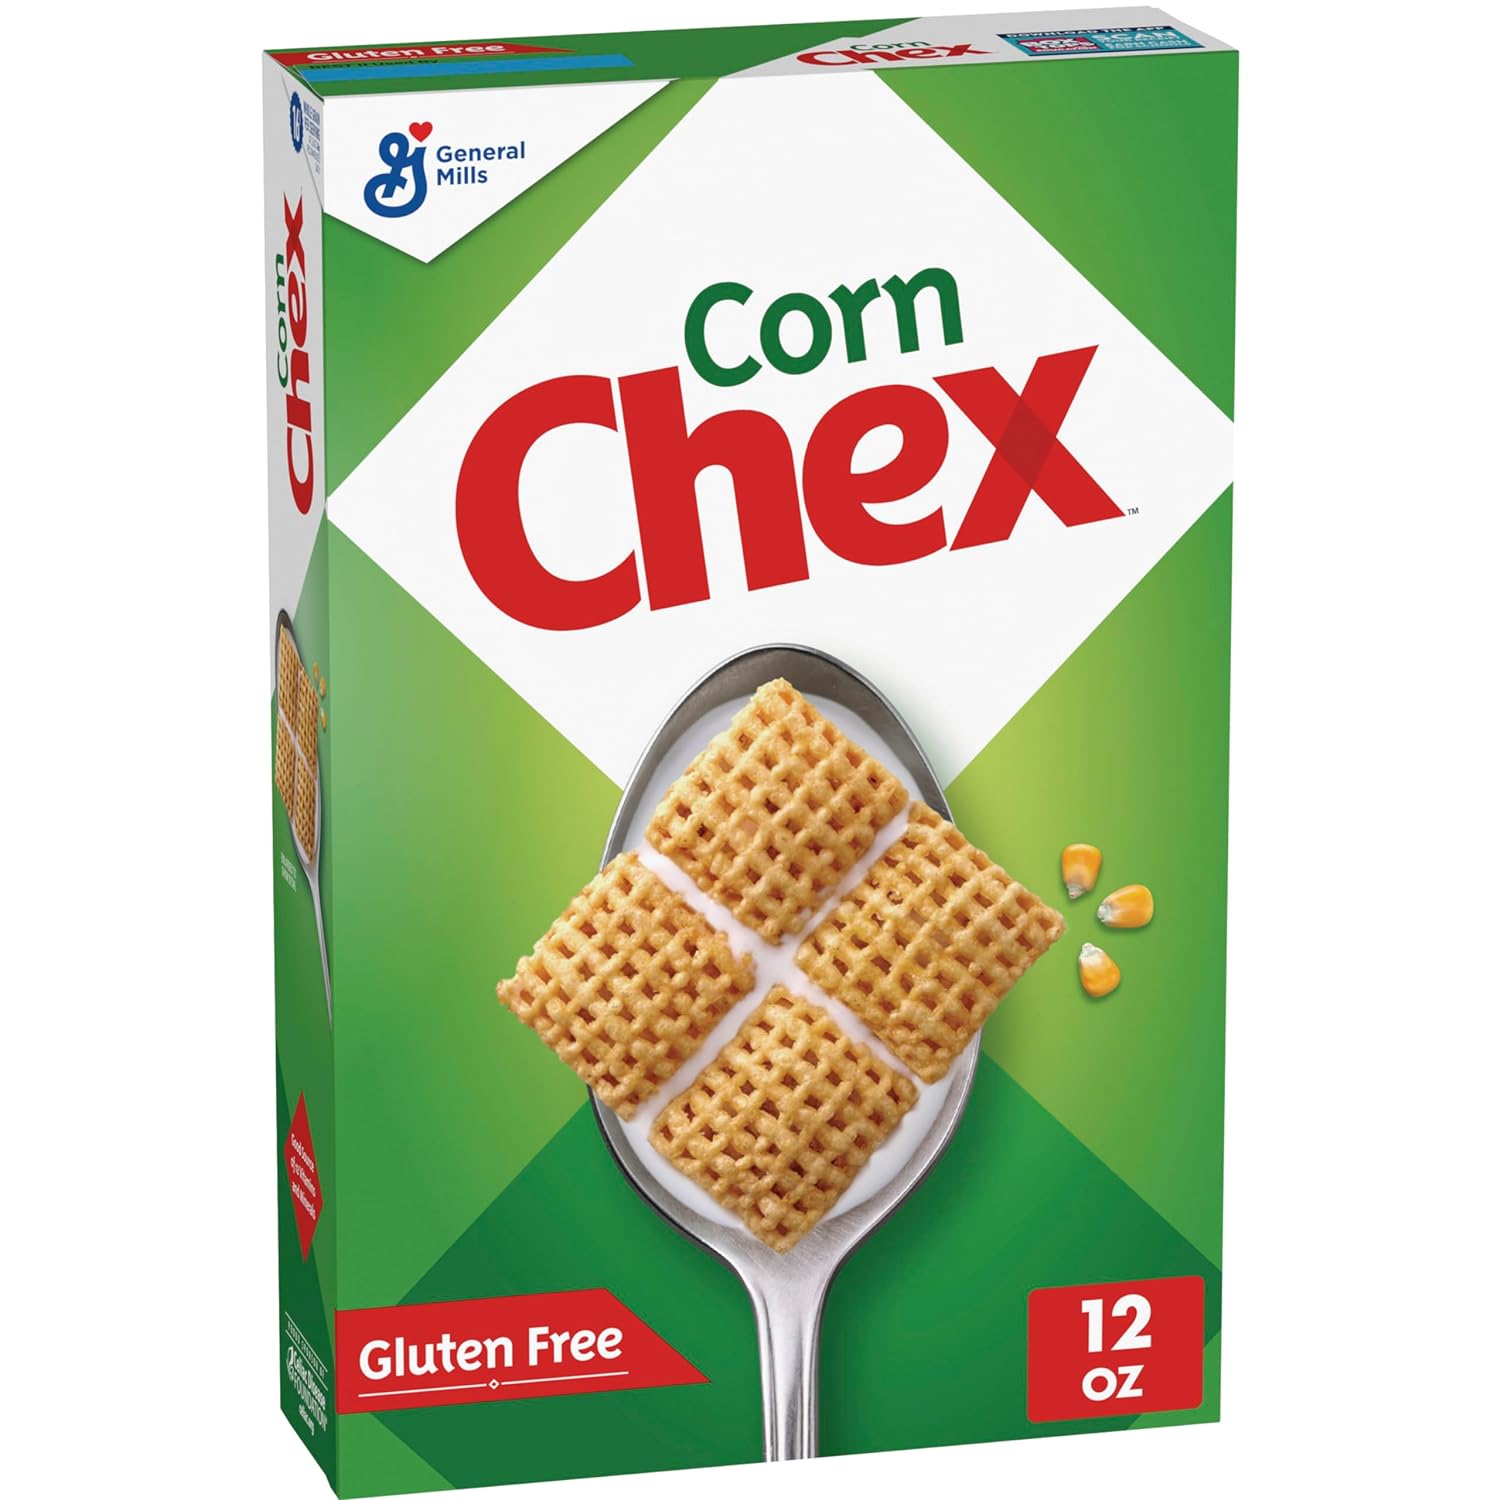 Corn Chex Gluten Free Breakfast Cereal, Made with Whole Grain, 12 oz